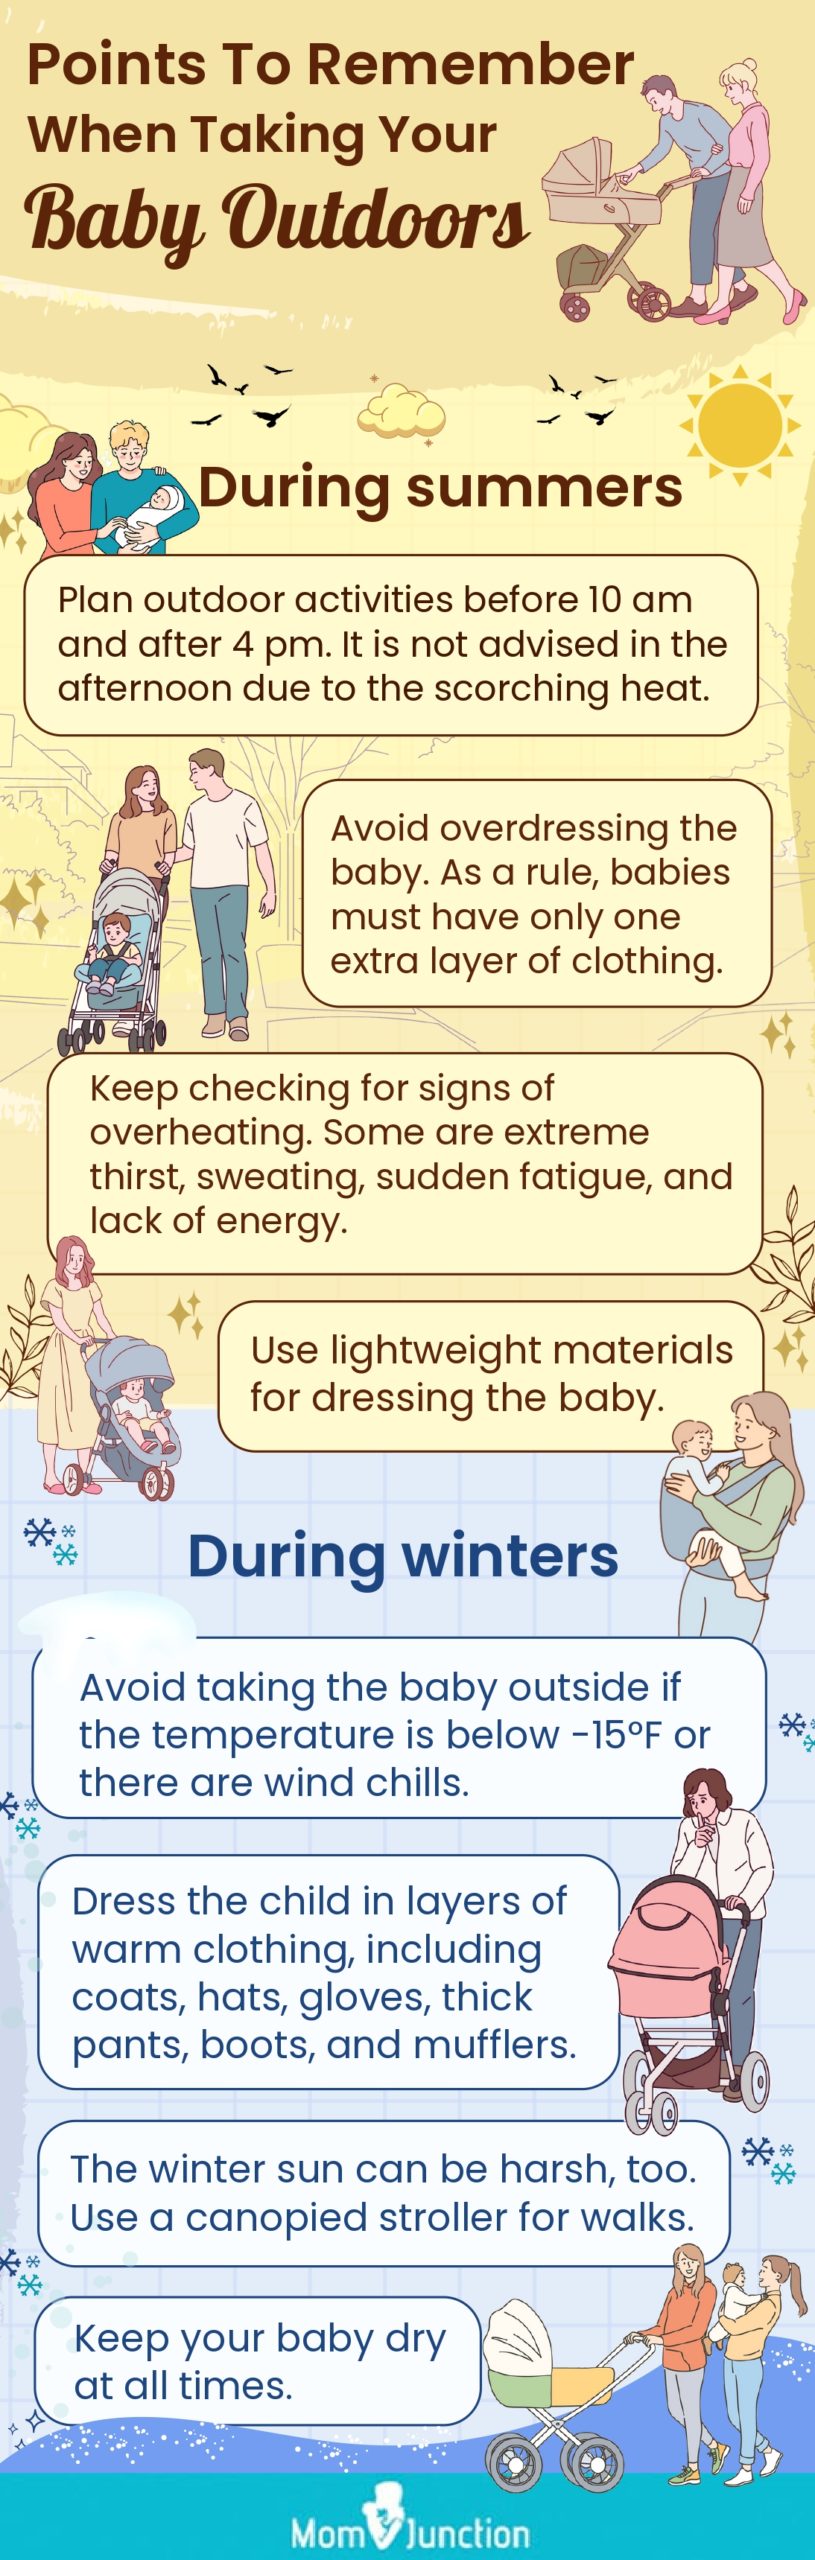 when taking your points to remember baby outdoors (infographic)